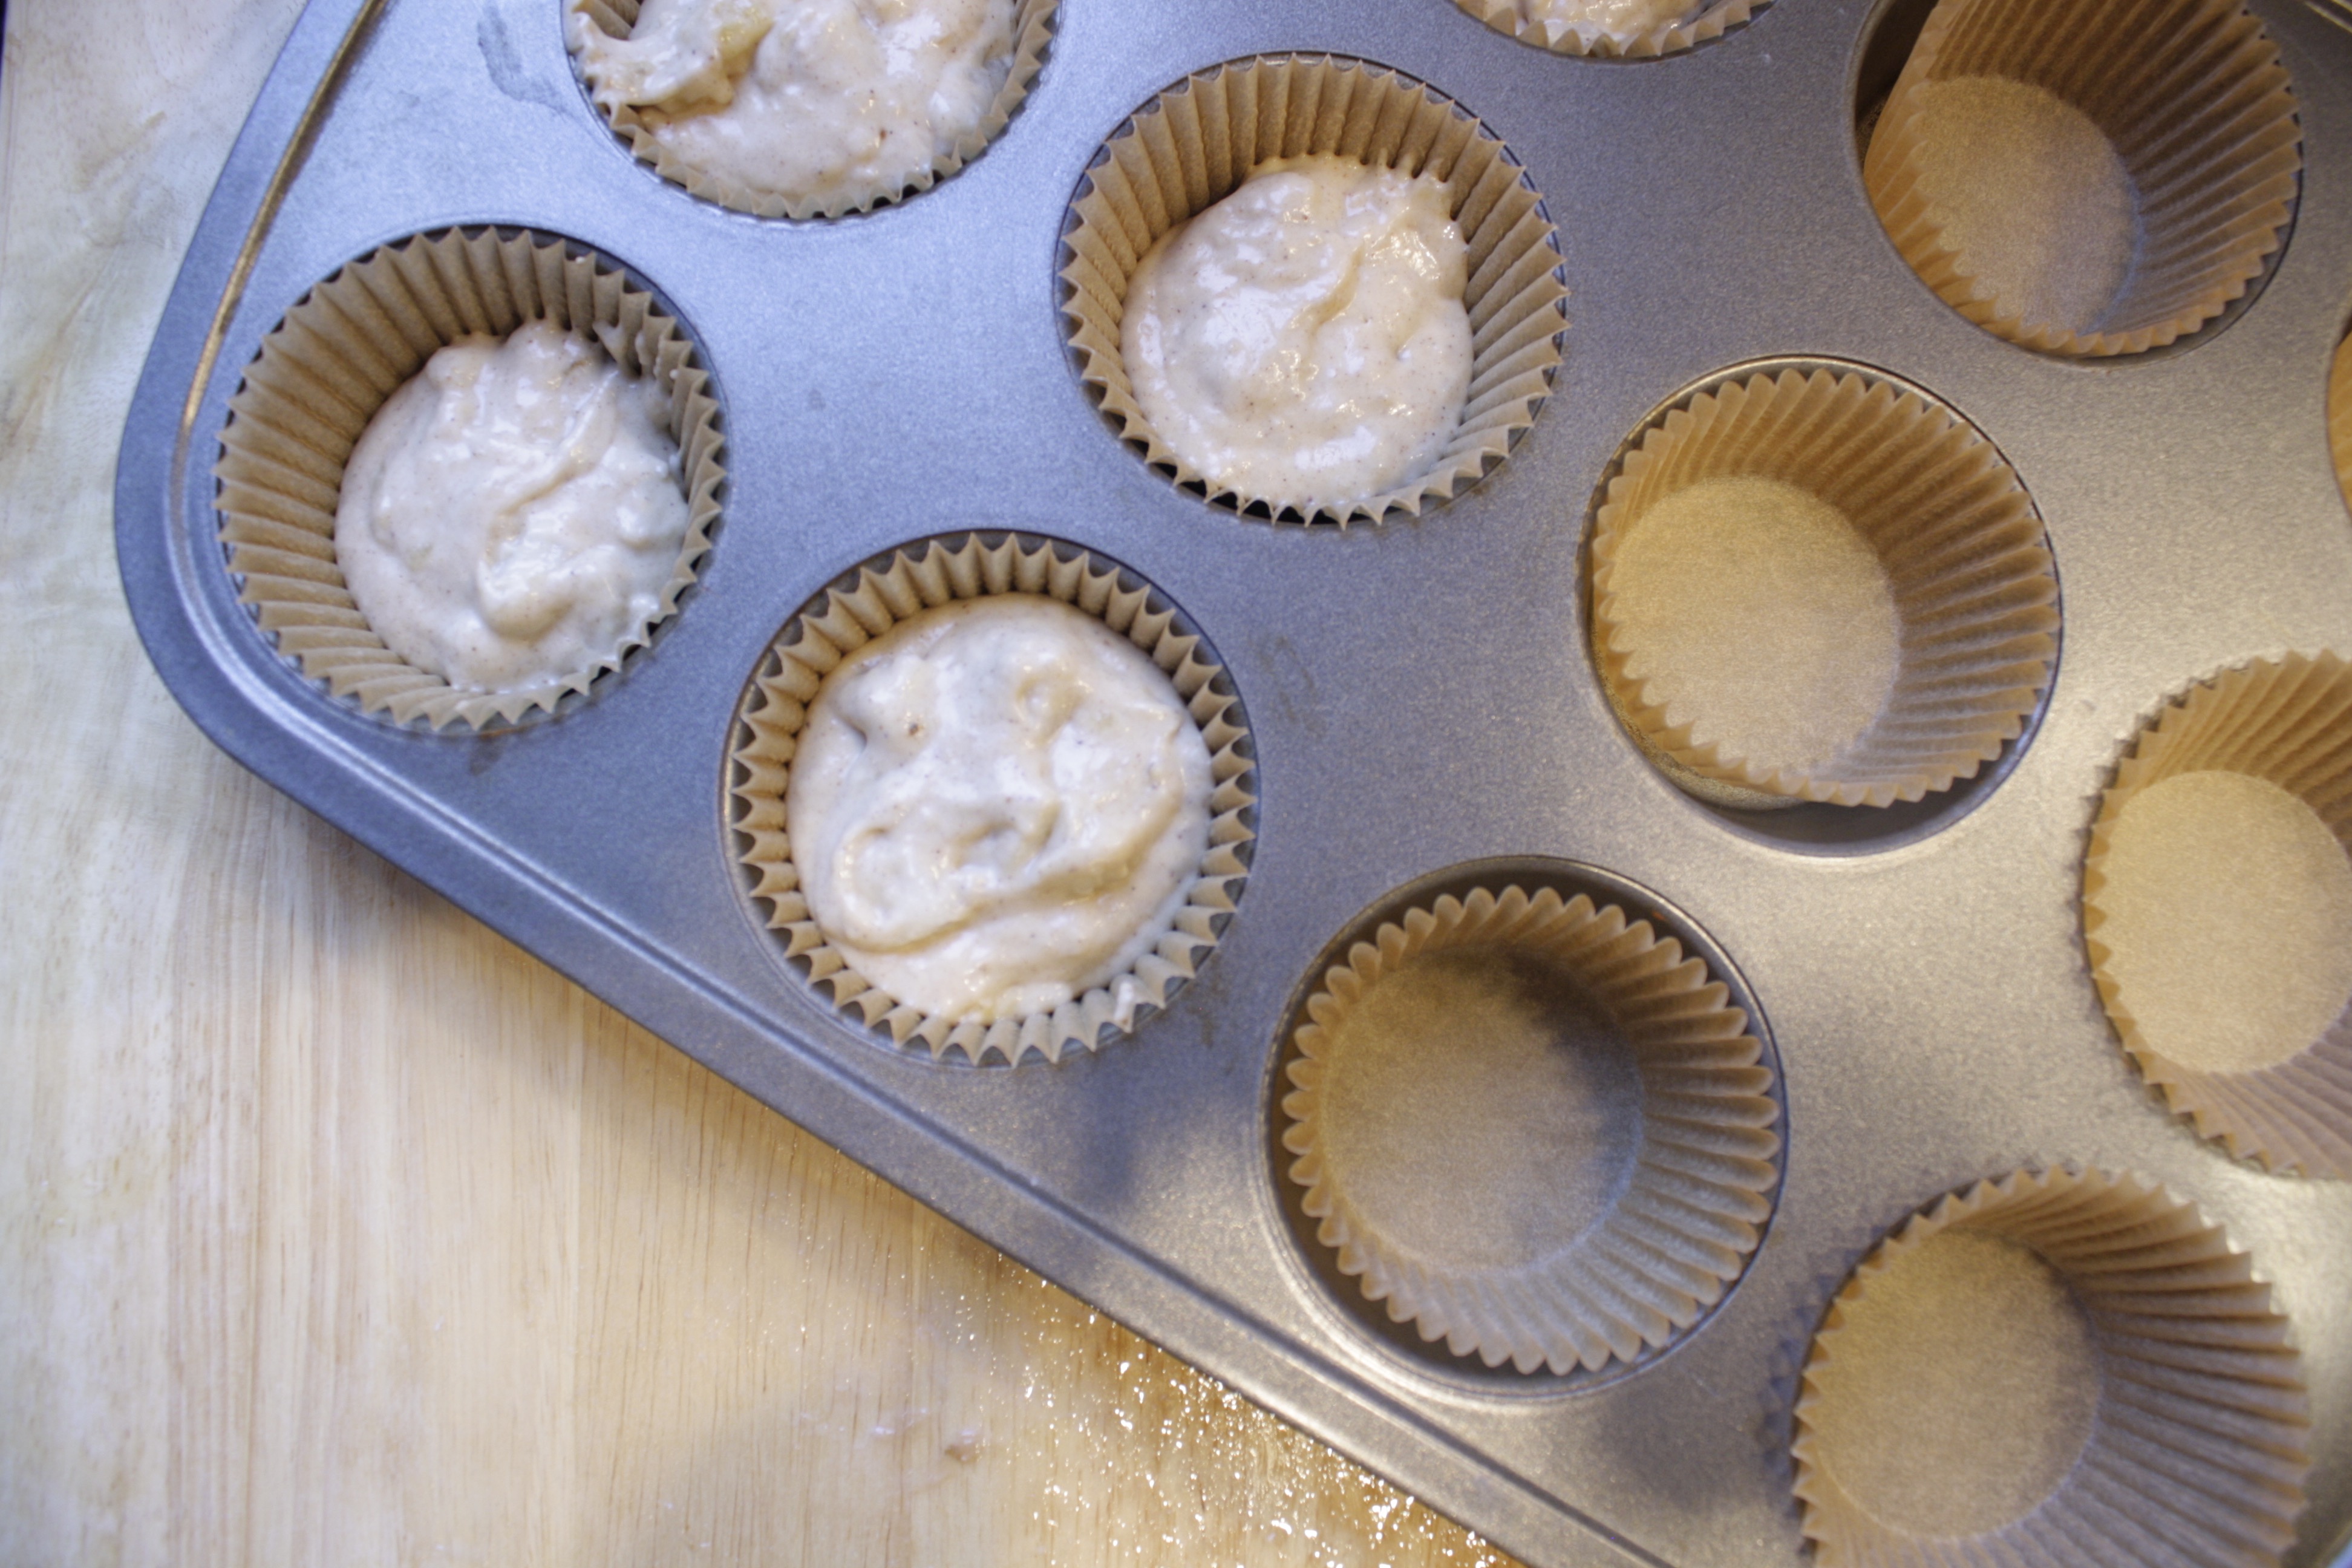 How to Make Spiced Banana Pear Muffins